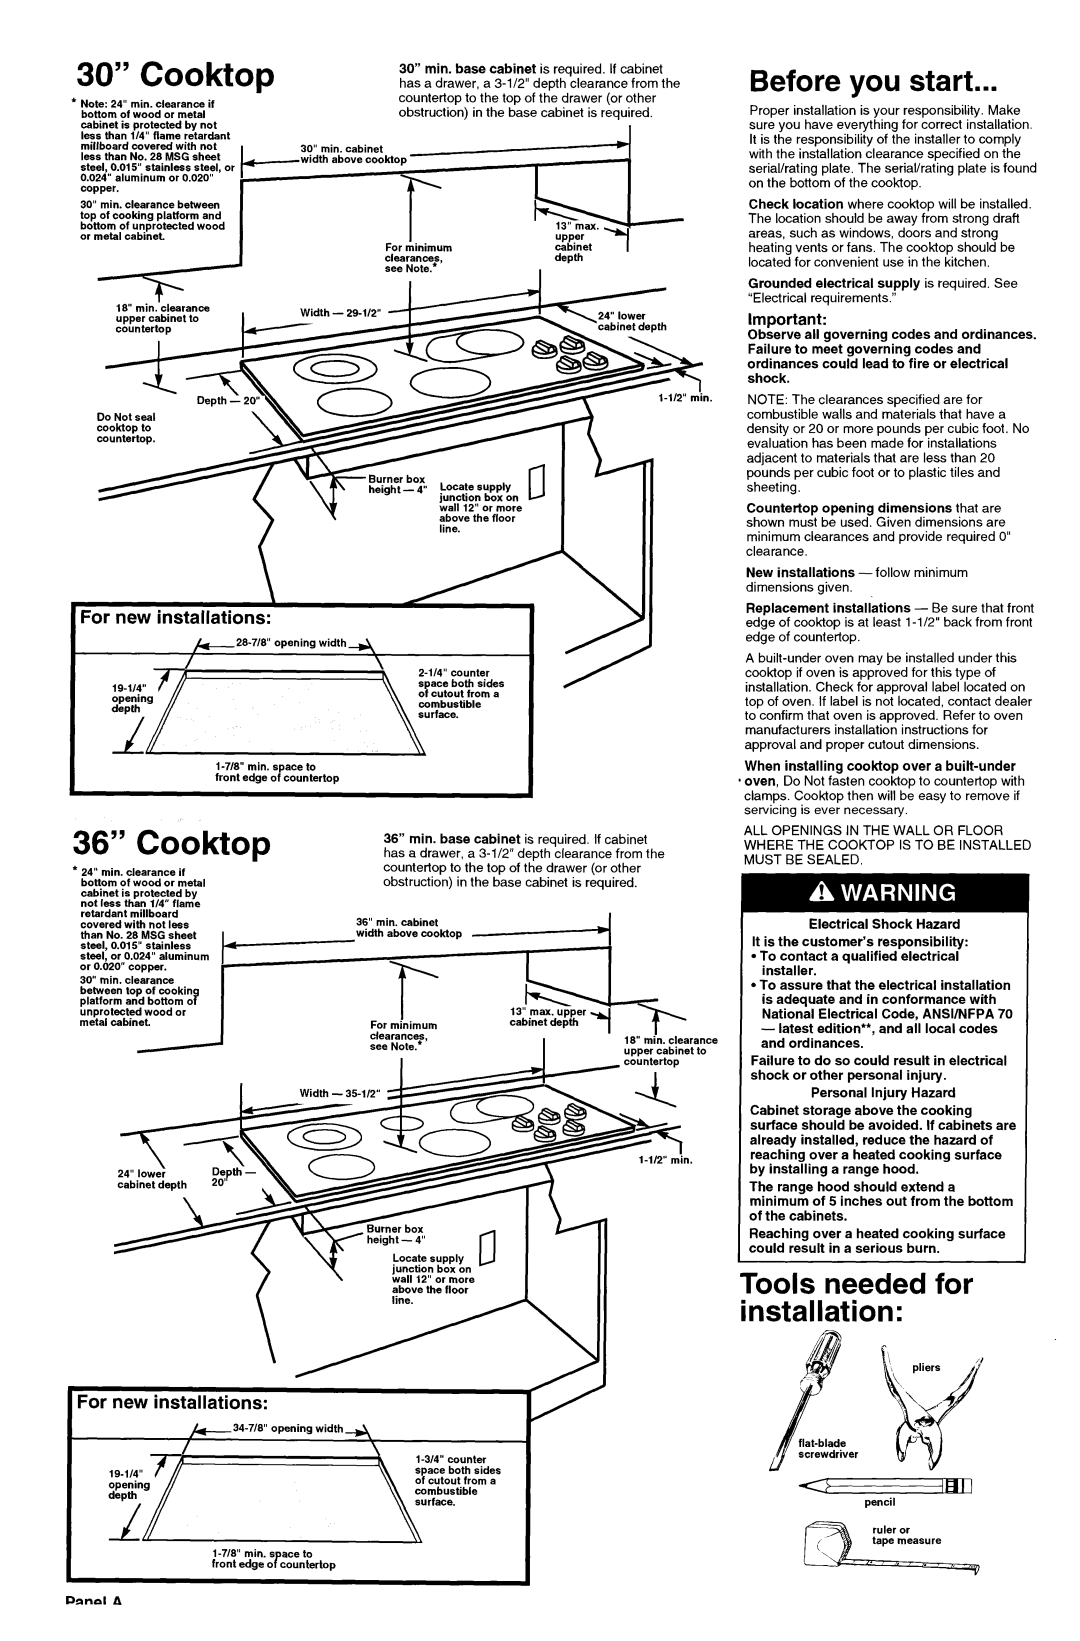 KitchenAid 4366501 Before you start, Tools needed for installation, 36” Cooktop, For new installations 